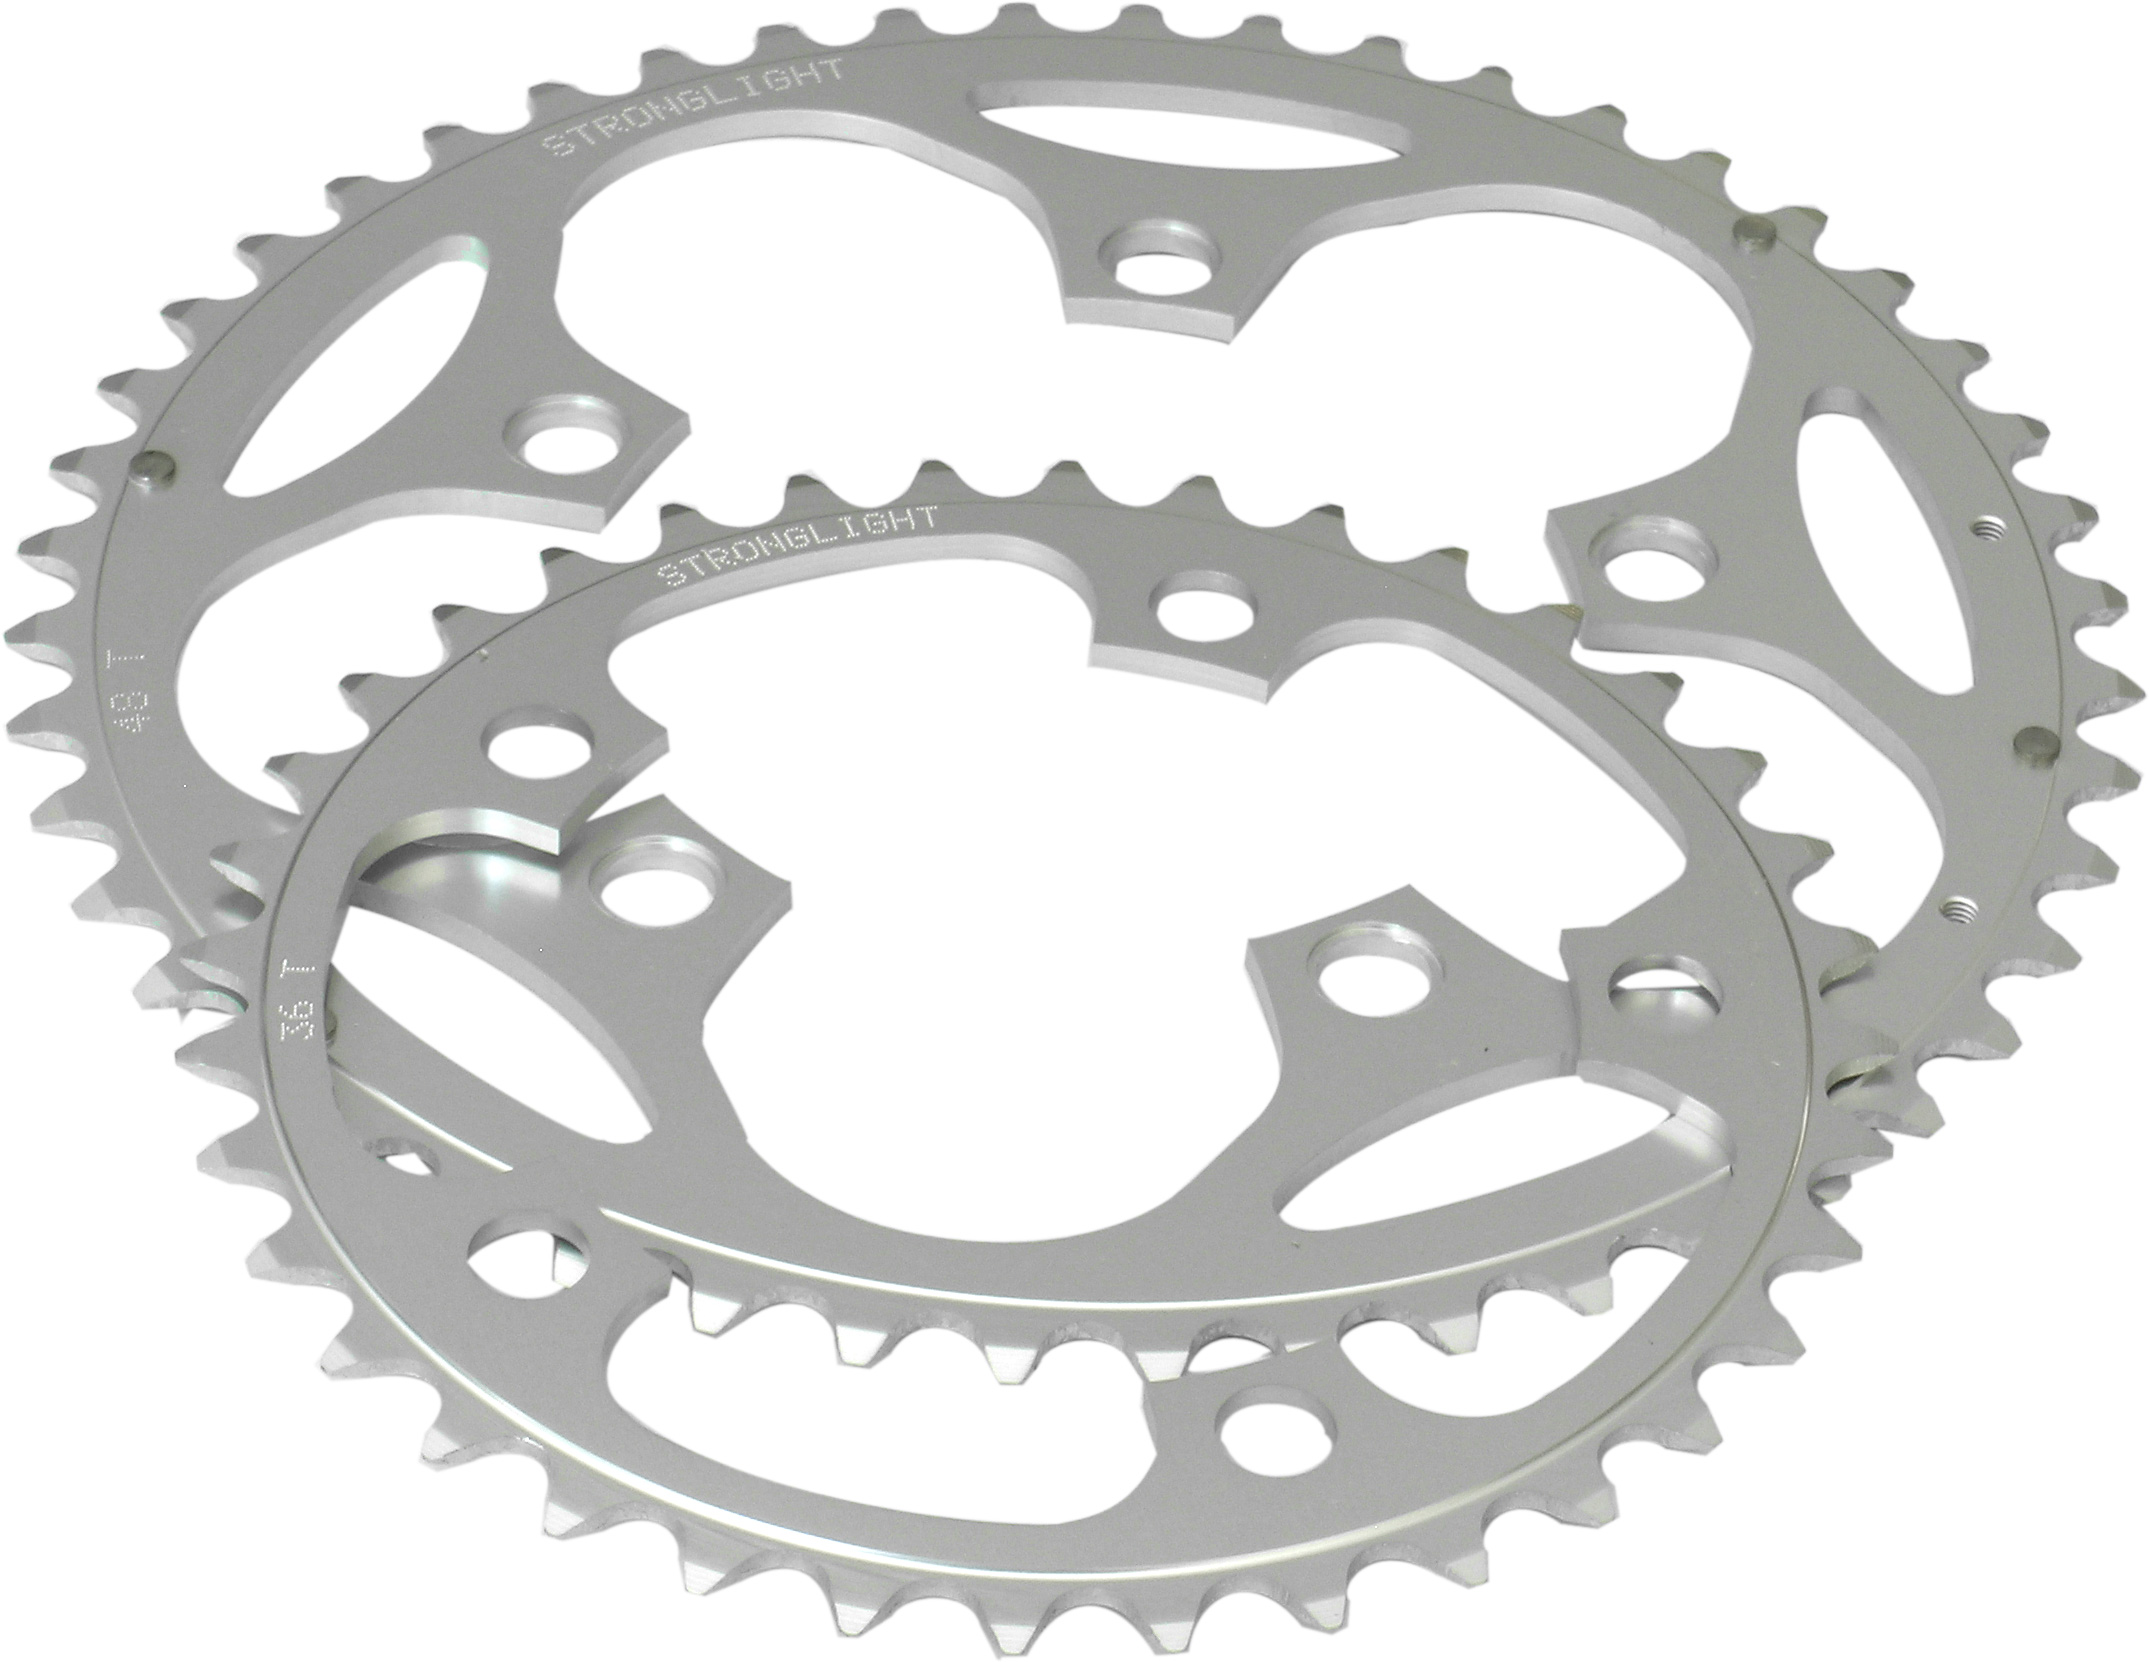 RD11042S Stronglight 42T Silver 5-Arm Alloy Chainring